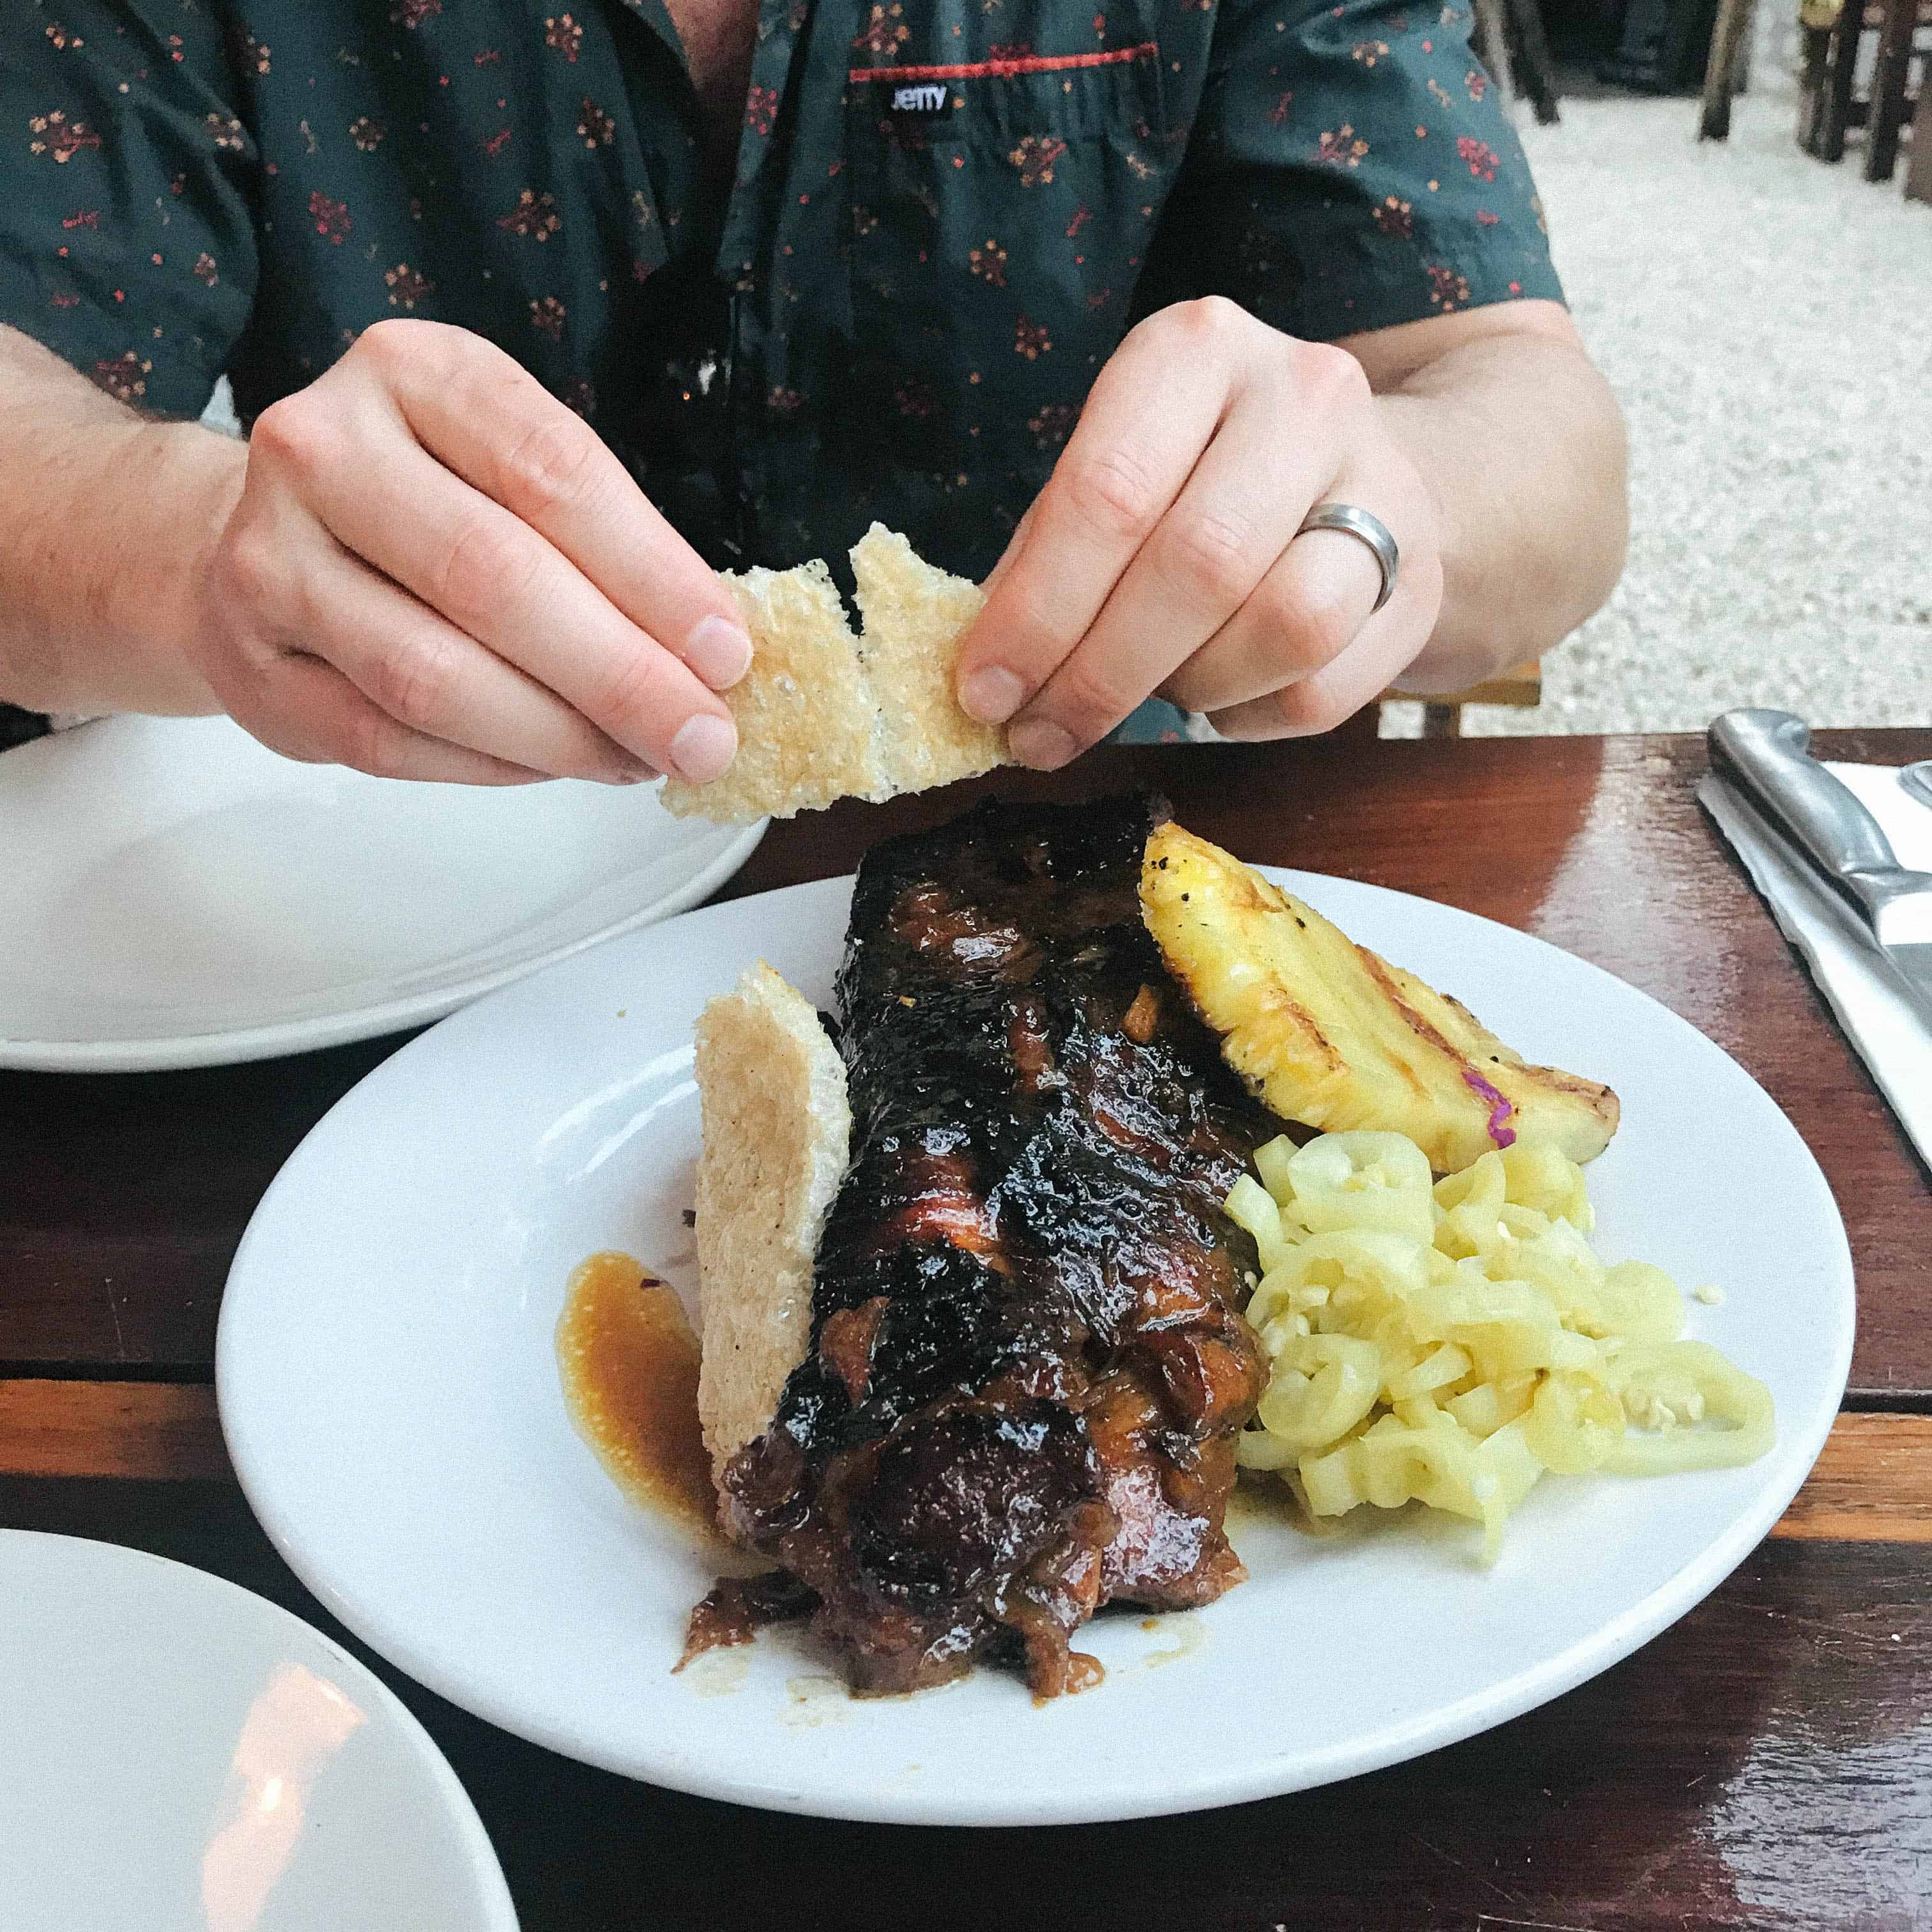 A man breaking crisp toast over braised shortribs.